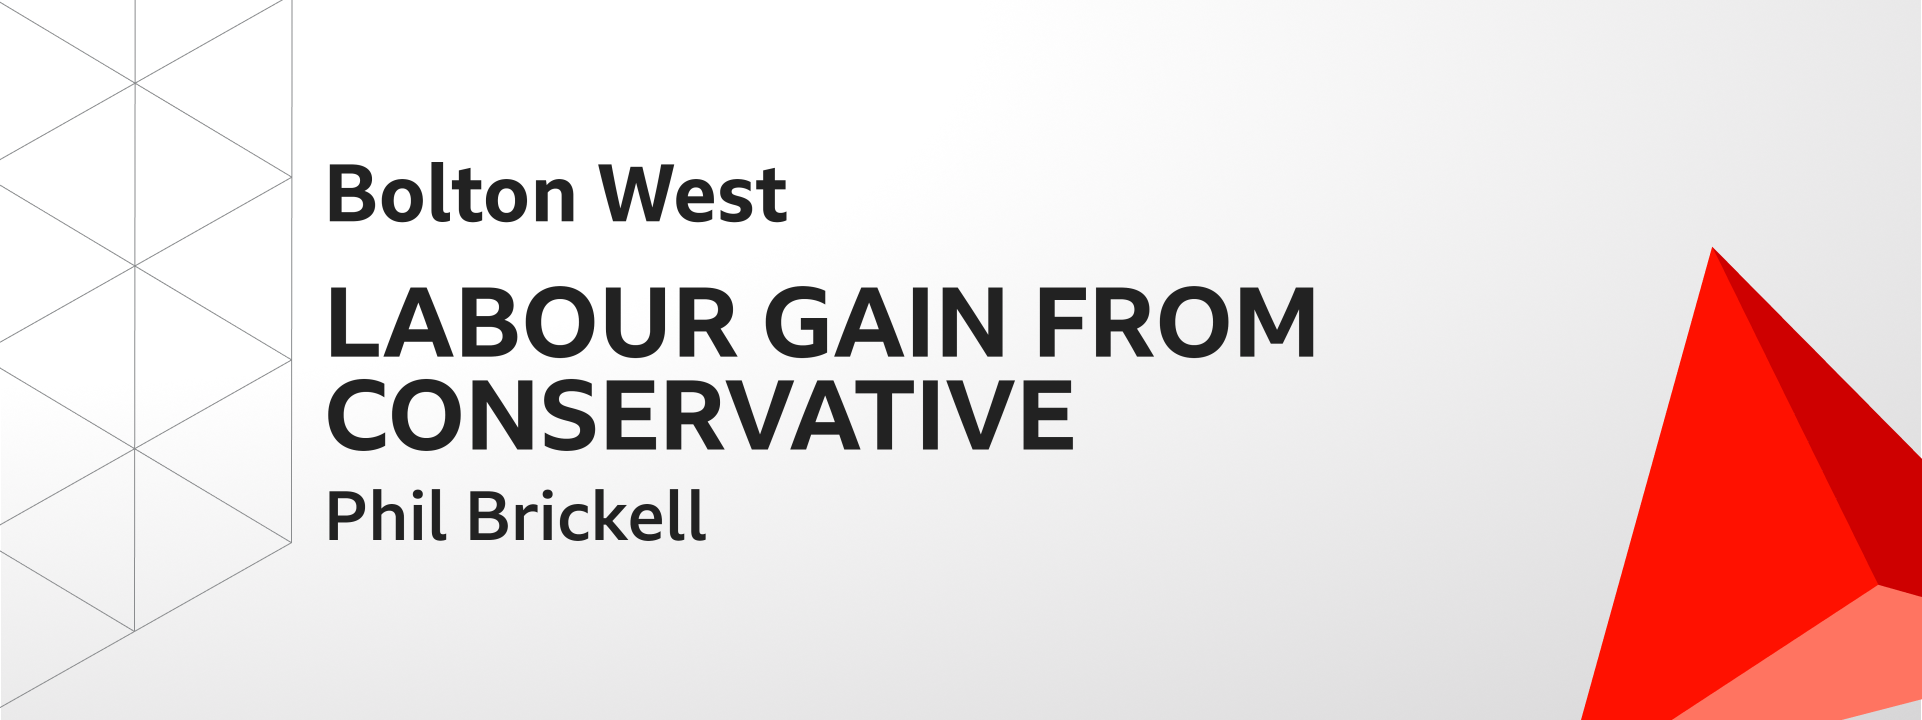 Graphic showing Labour gains Bolton West from the Conservatives. The winning candidate was Phil Brickell.